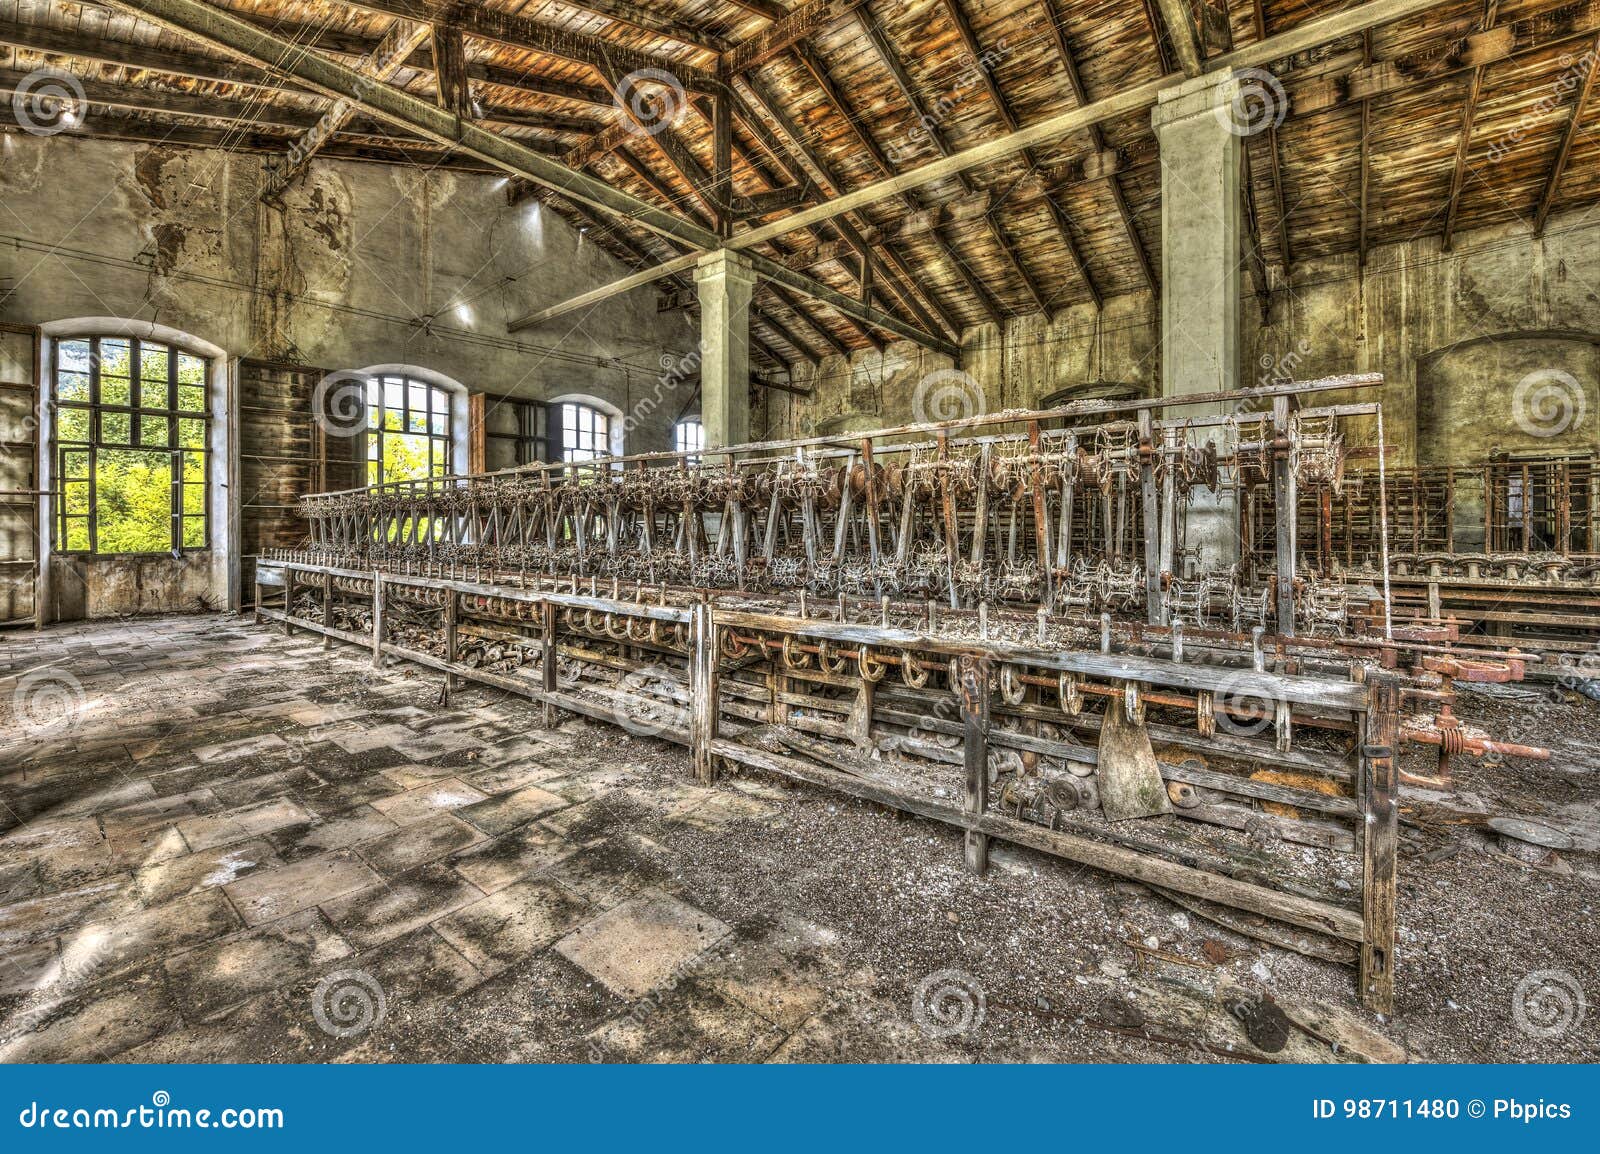 old weaving looms and spinning machinery at an abandoned factory